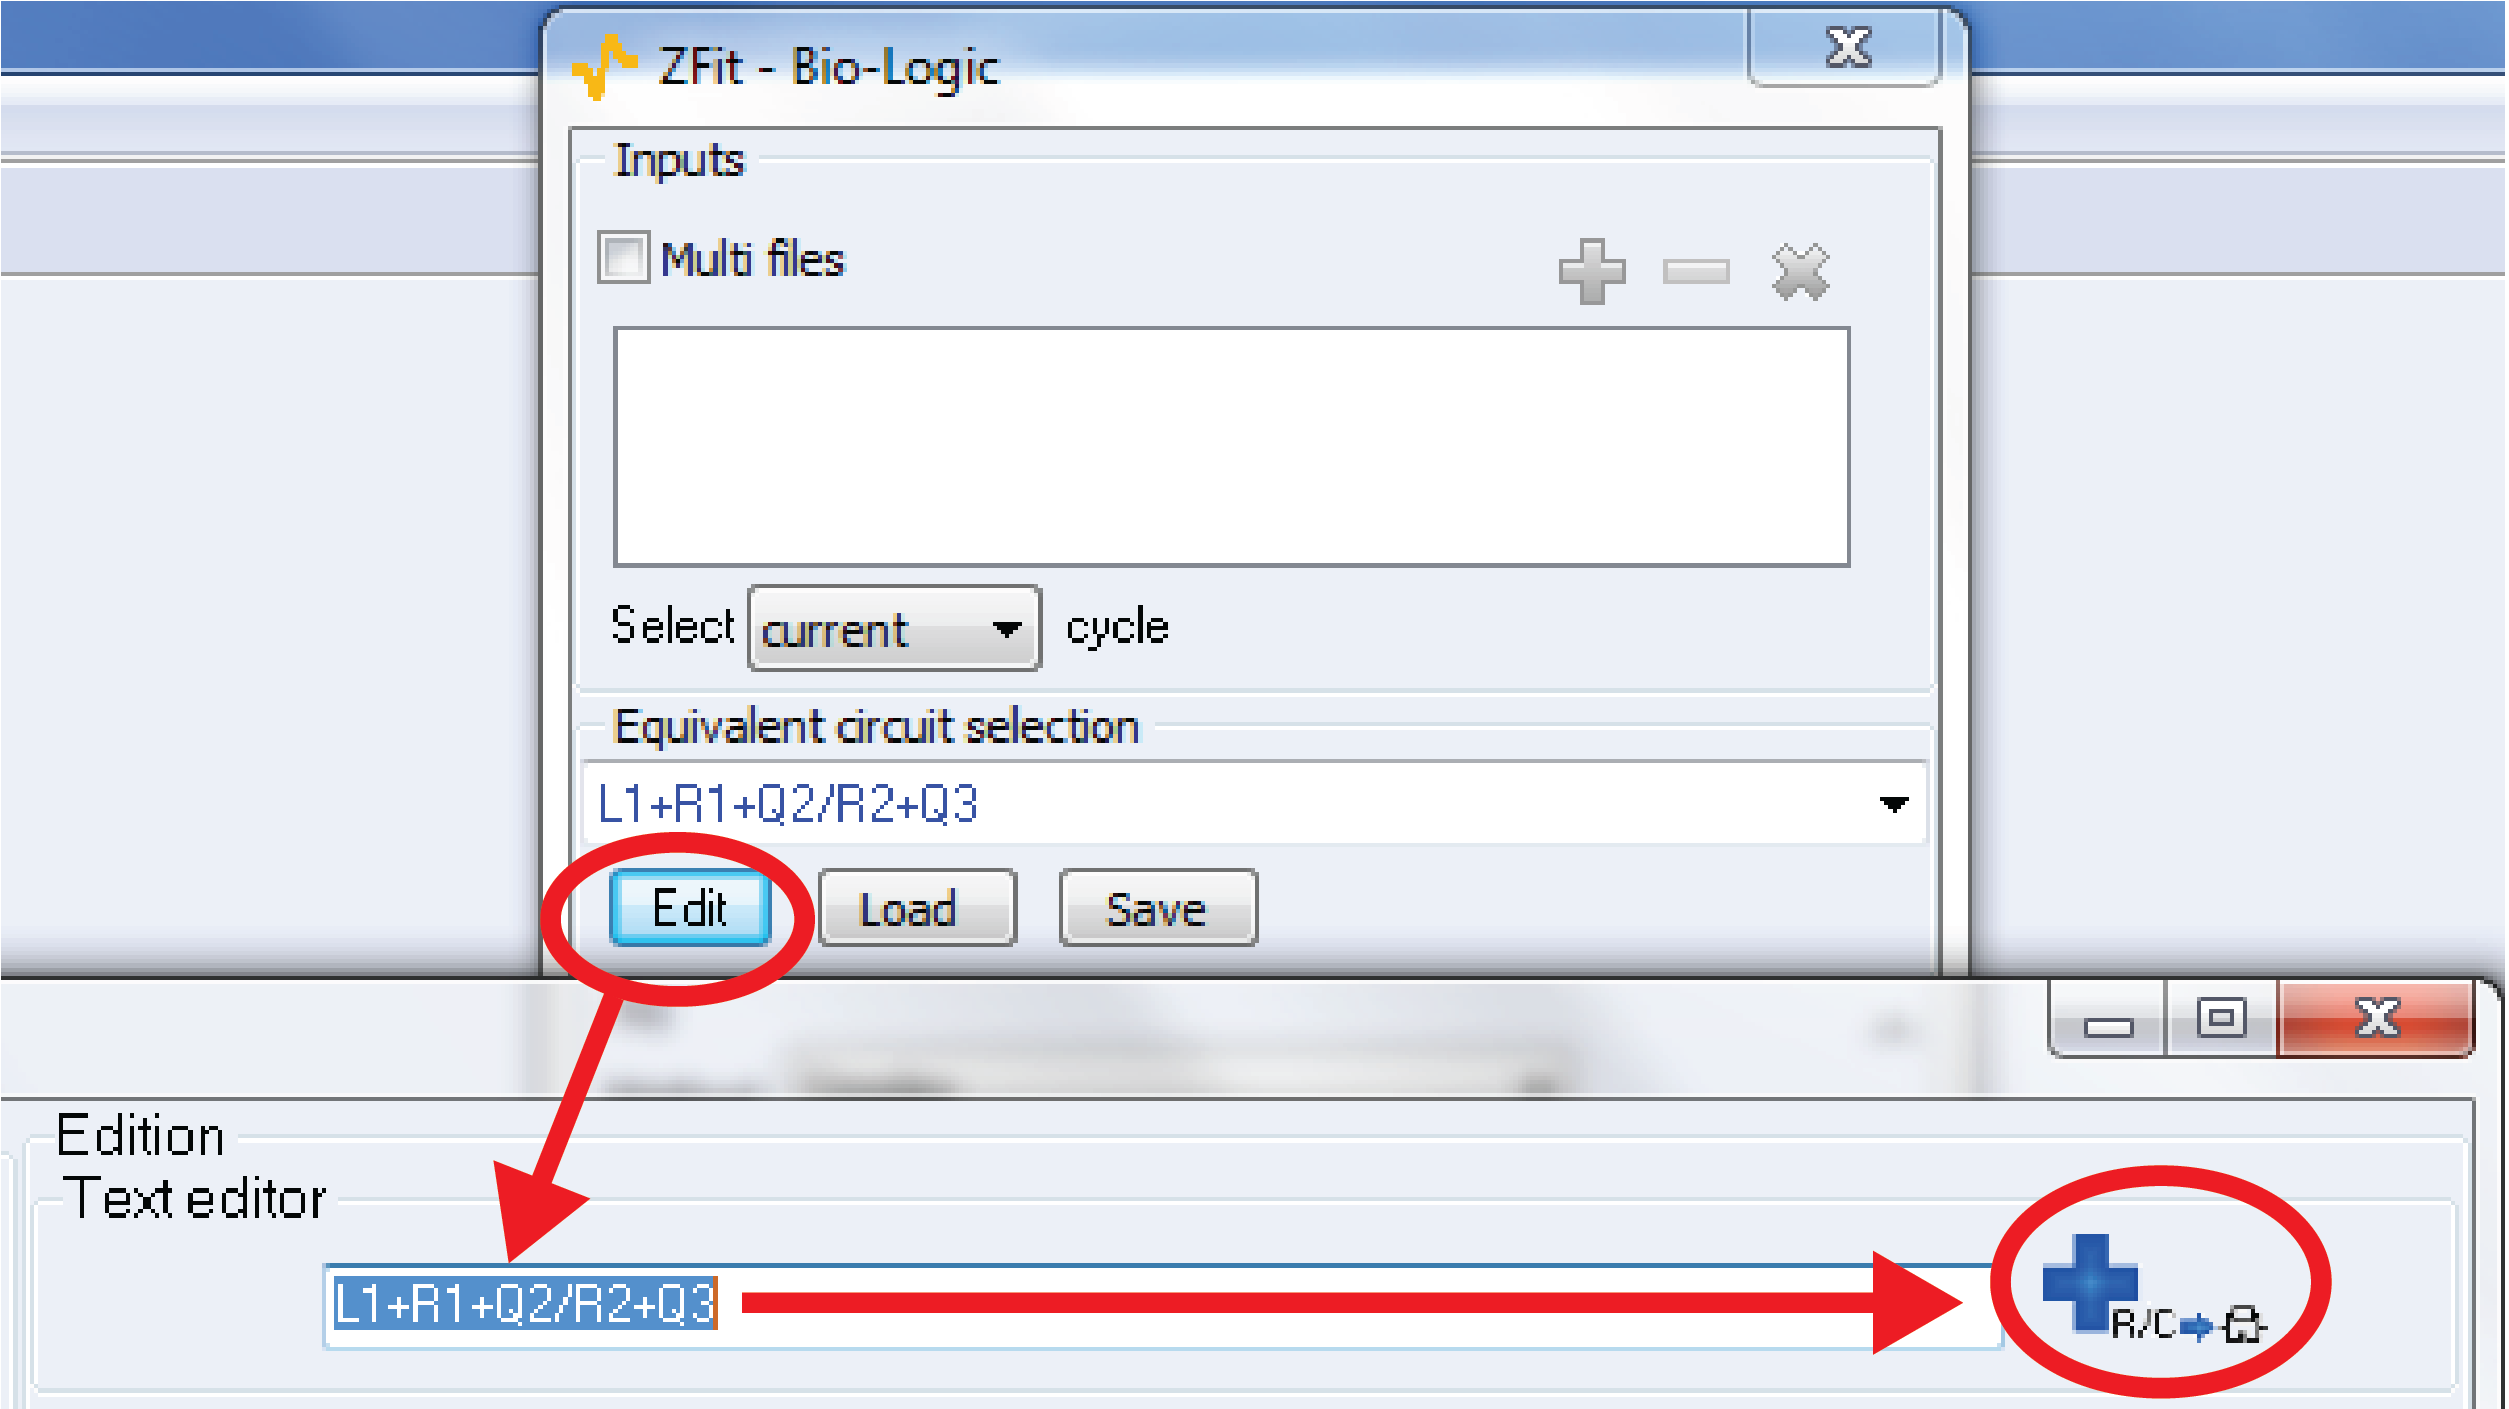 How to add a new electrical equivalent circuit in the ZFit analysis tool.